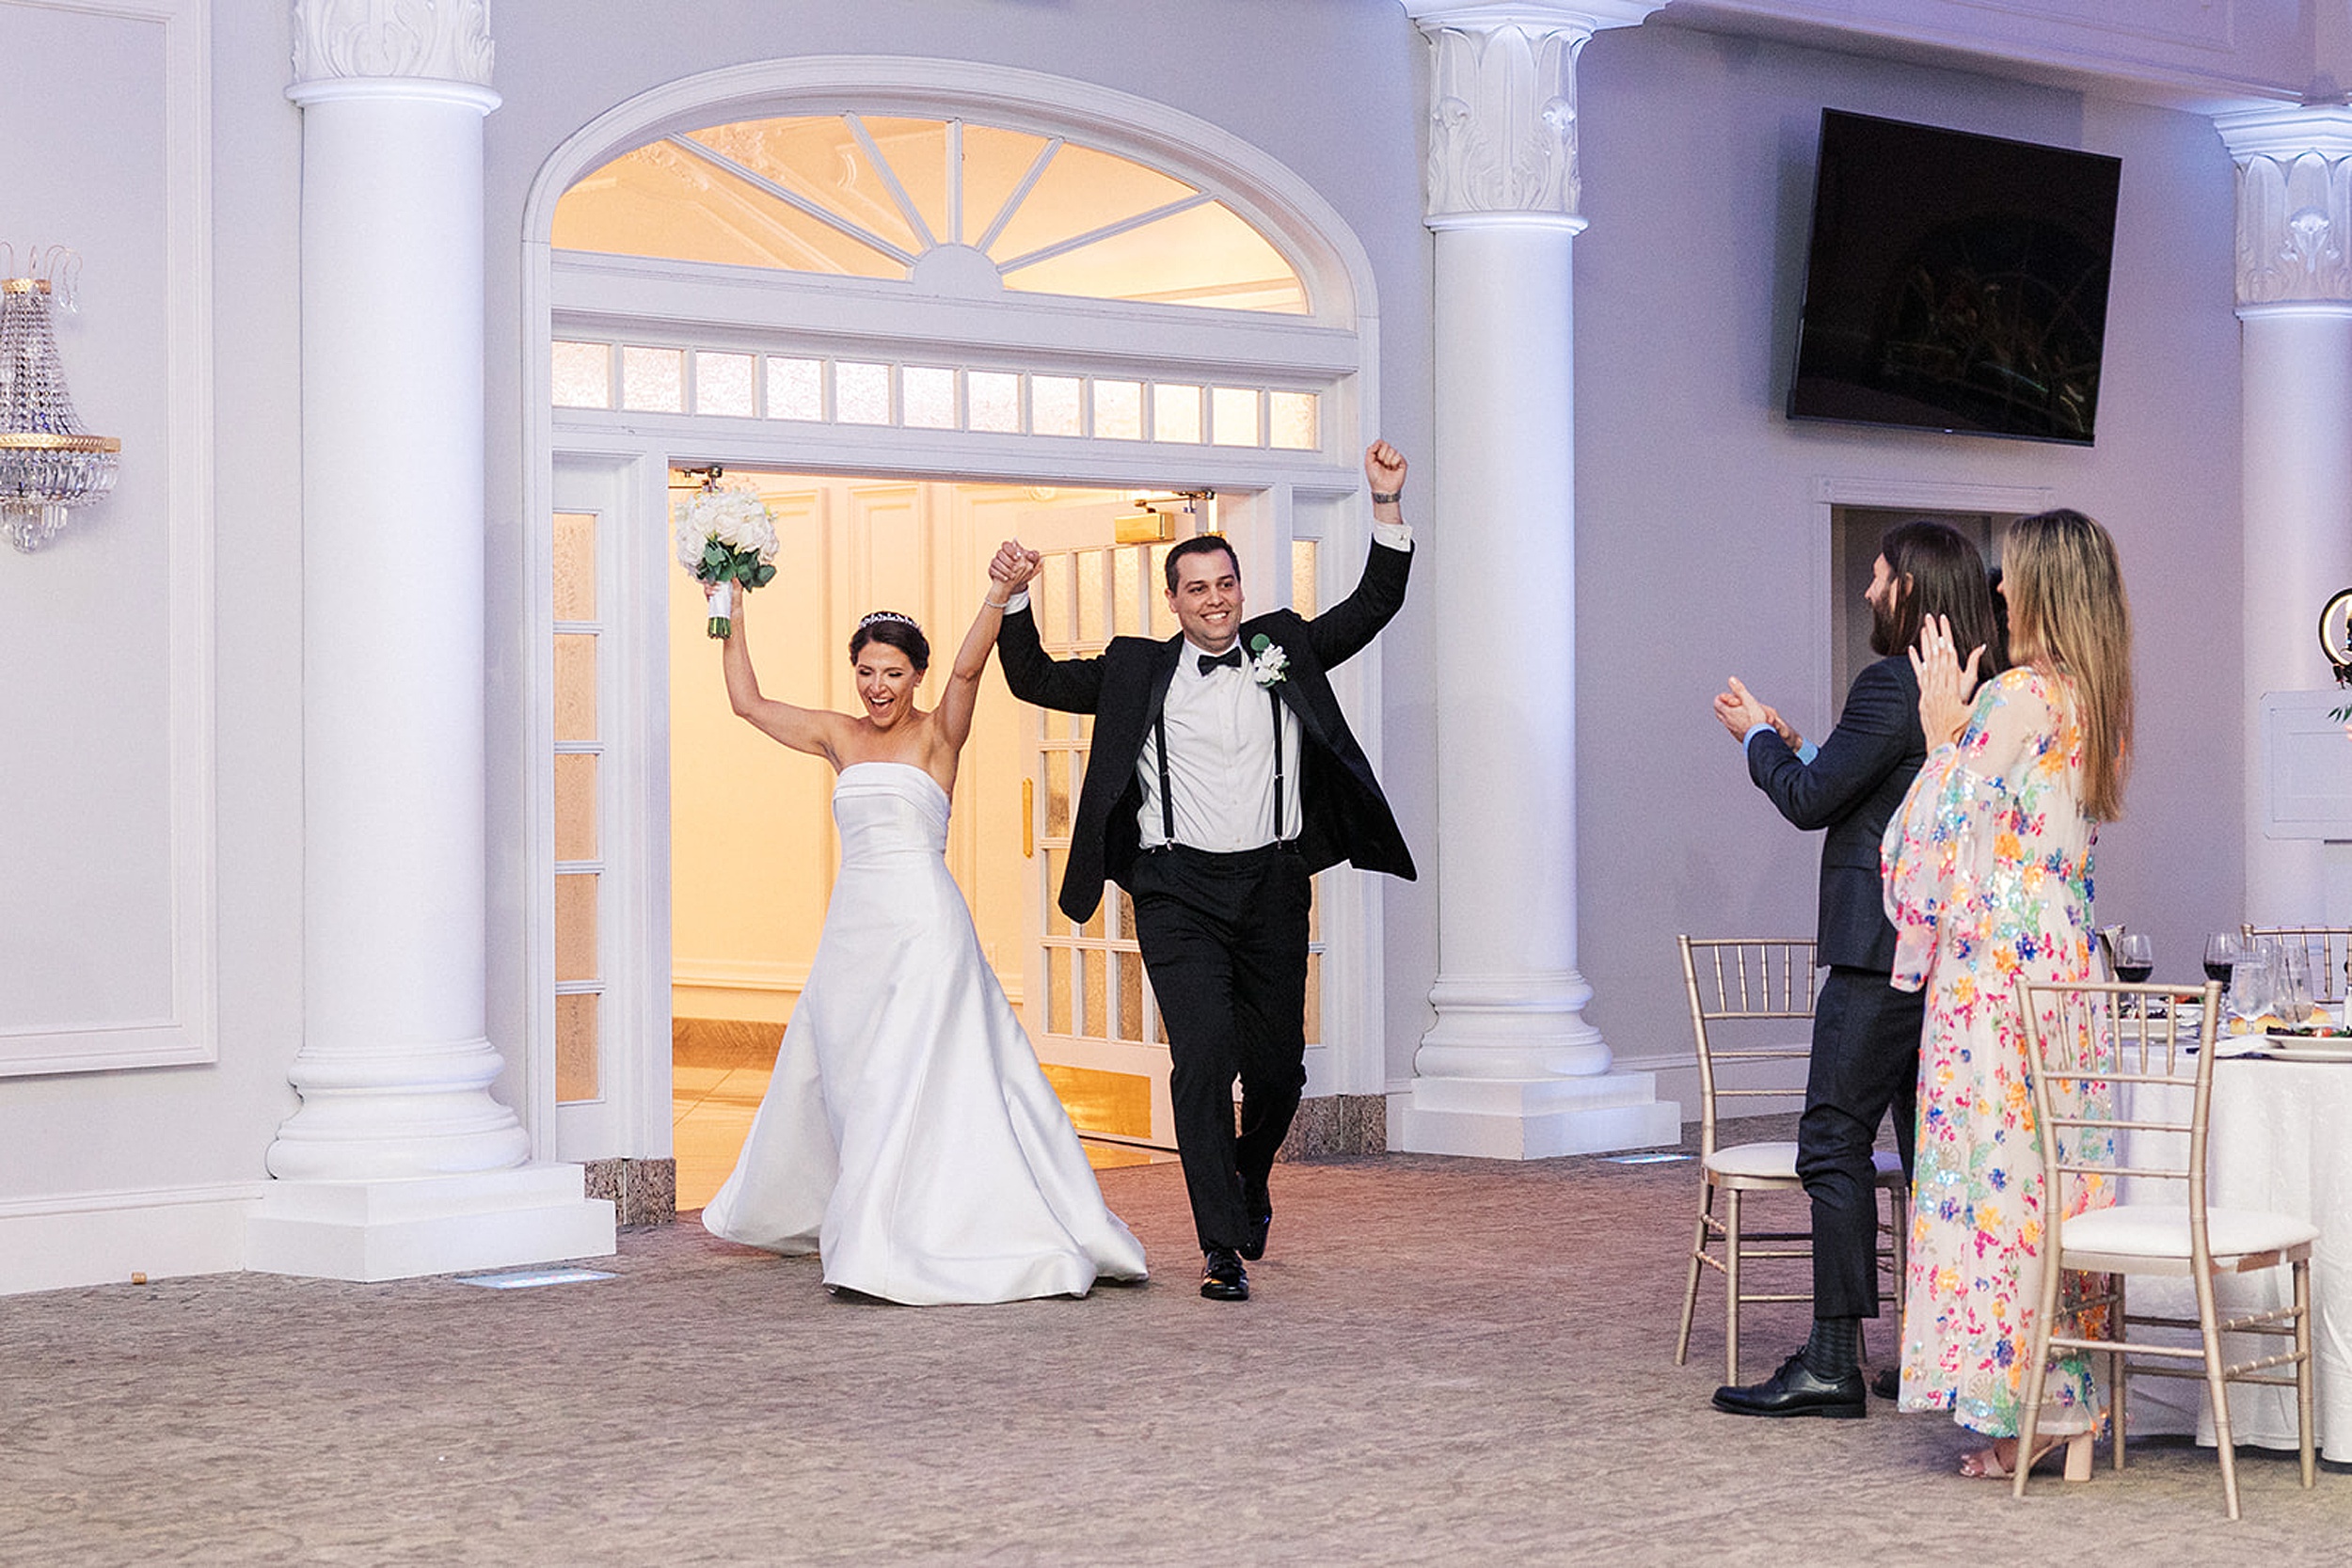 Newlyweds celebrate with guests as they enter their wedding reception